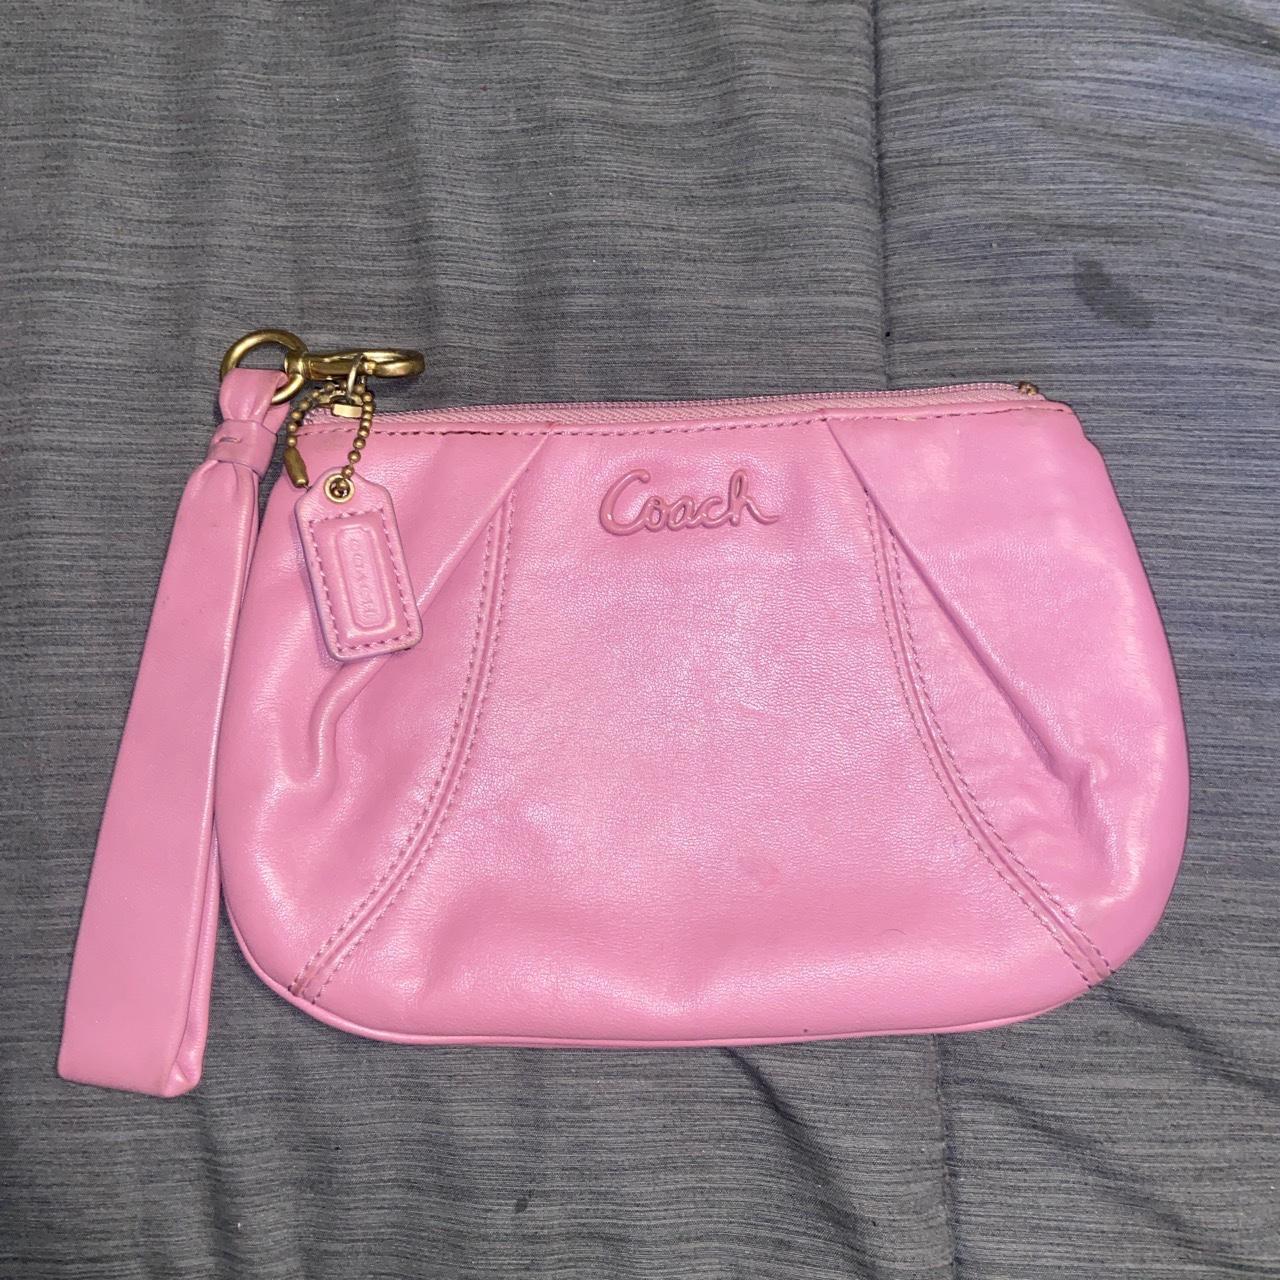 Coach, Bags, Vintage Pink Coach Bag In Perfect Condition